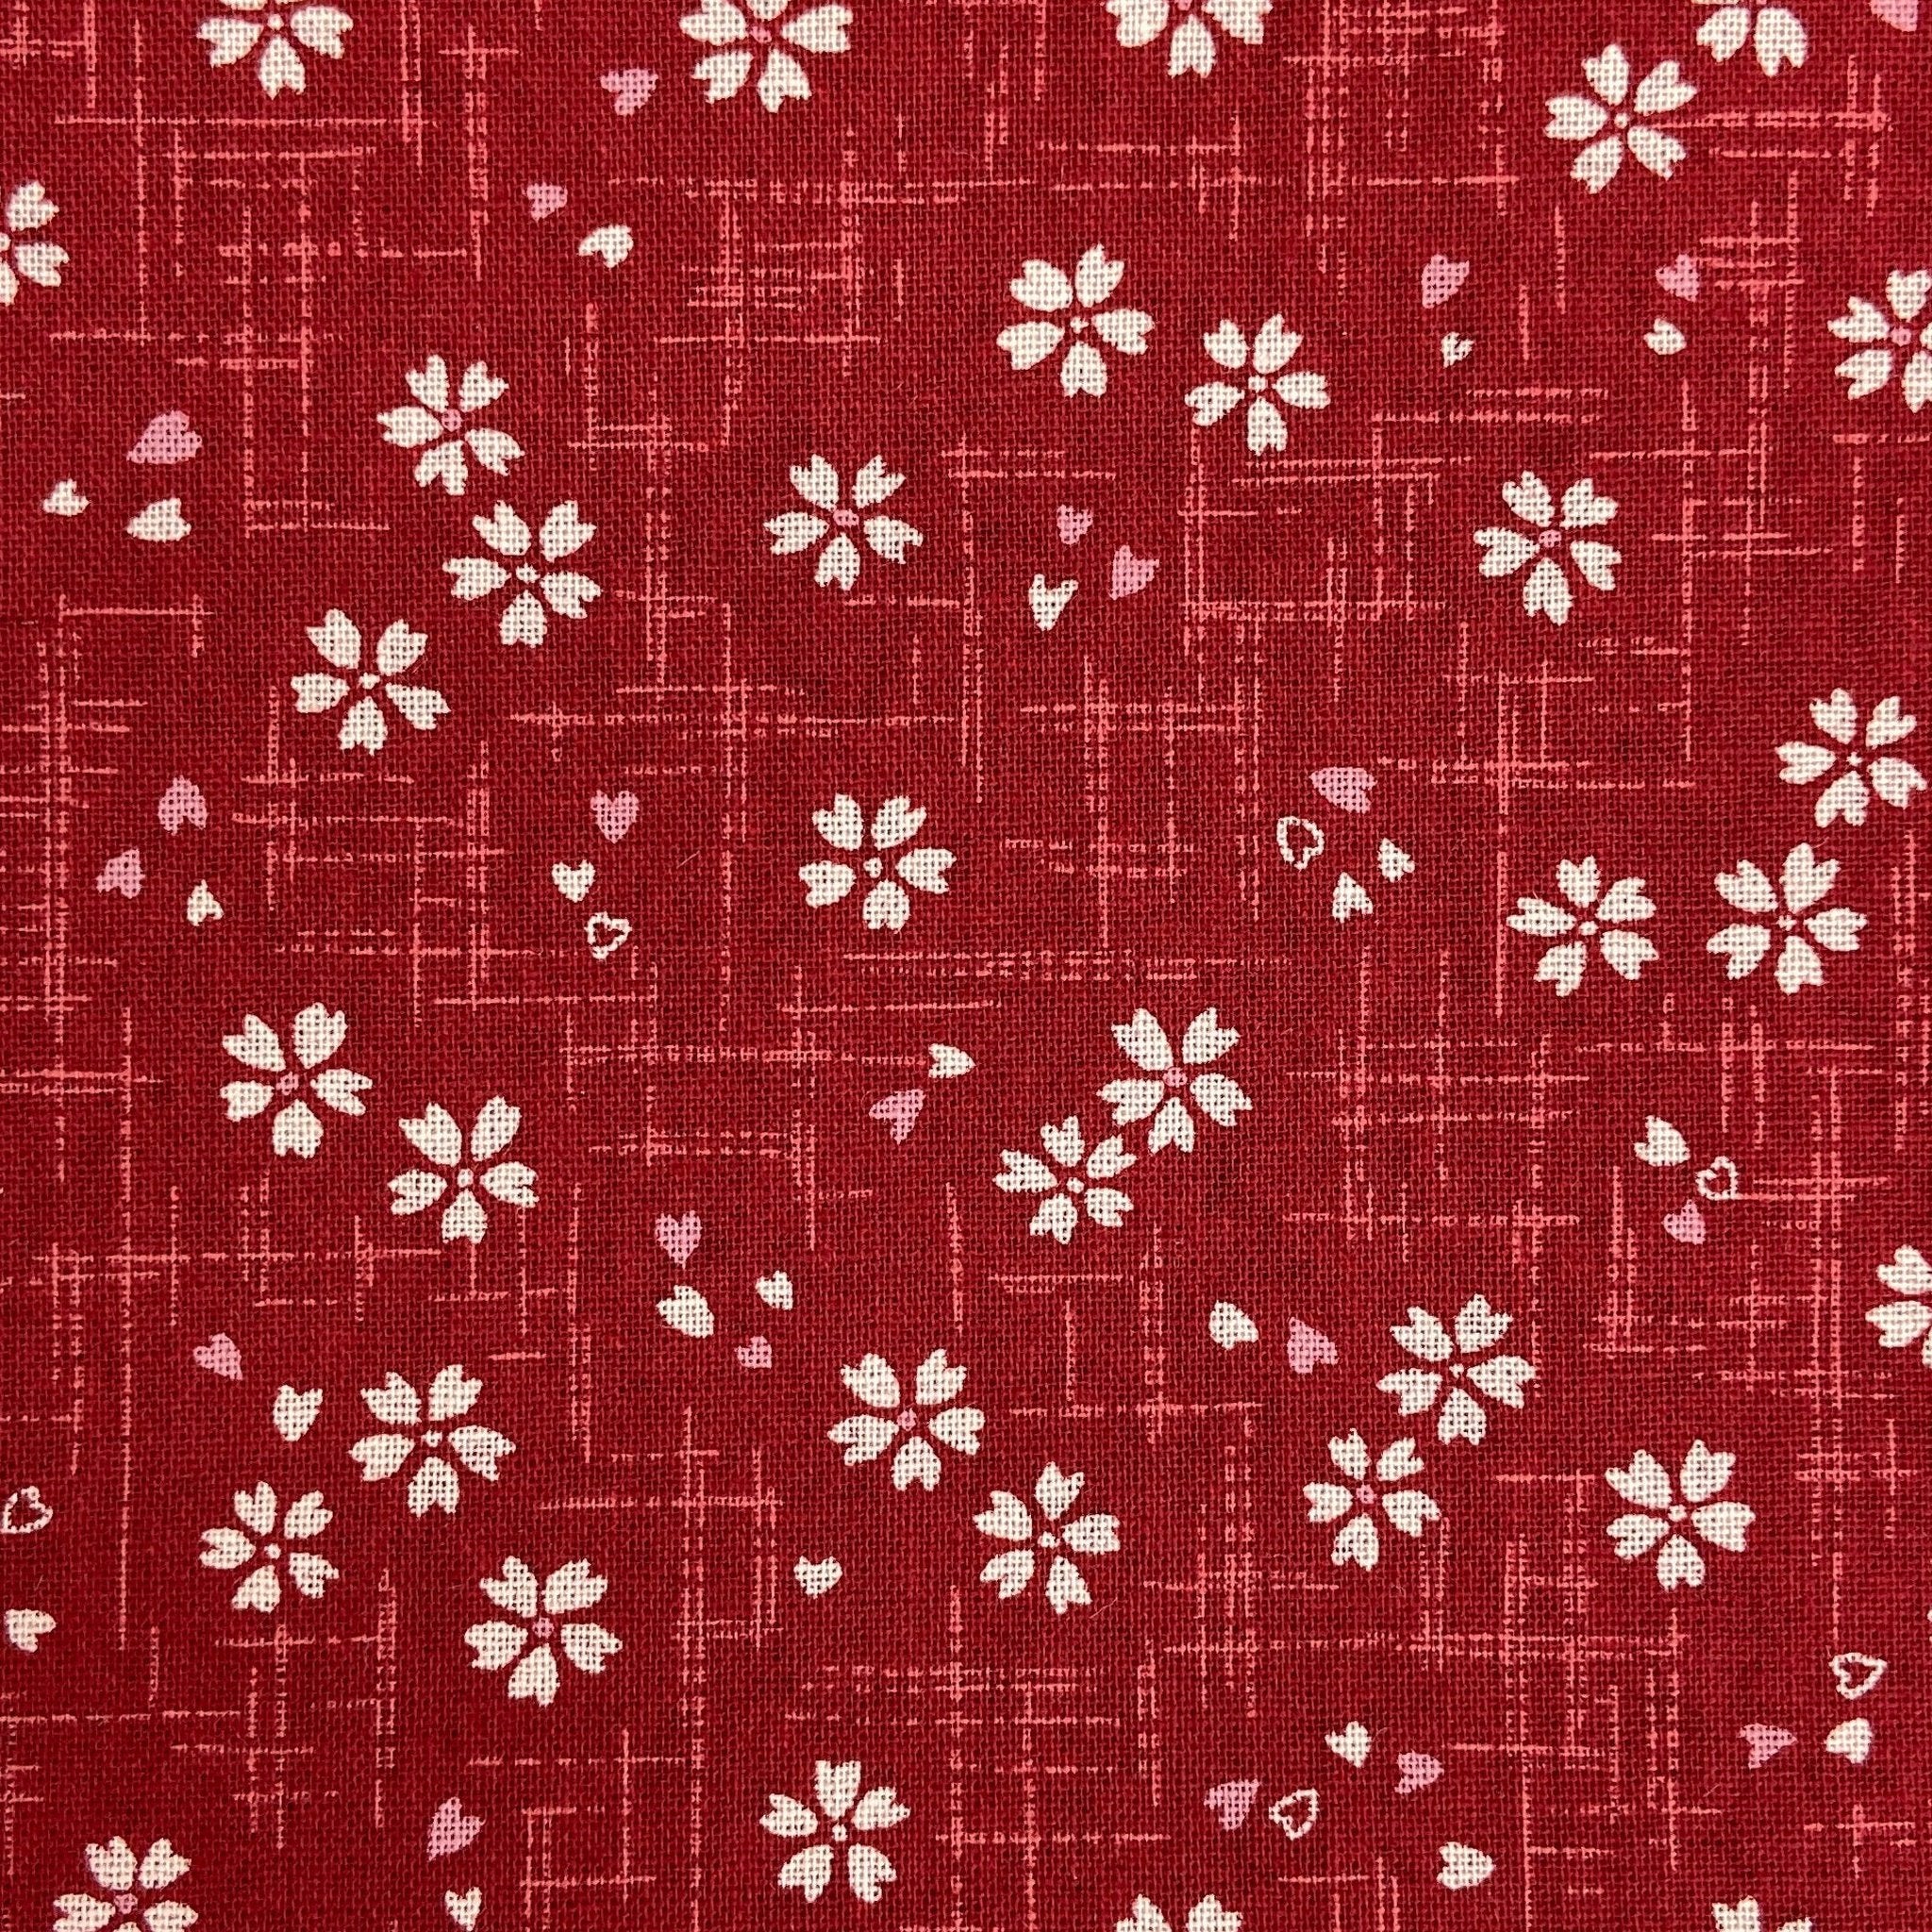 Japanese Cotton Sheeting Print - Cherry Blossom with Falling Petals Red